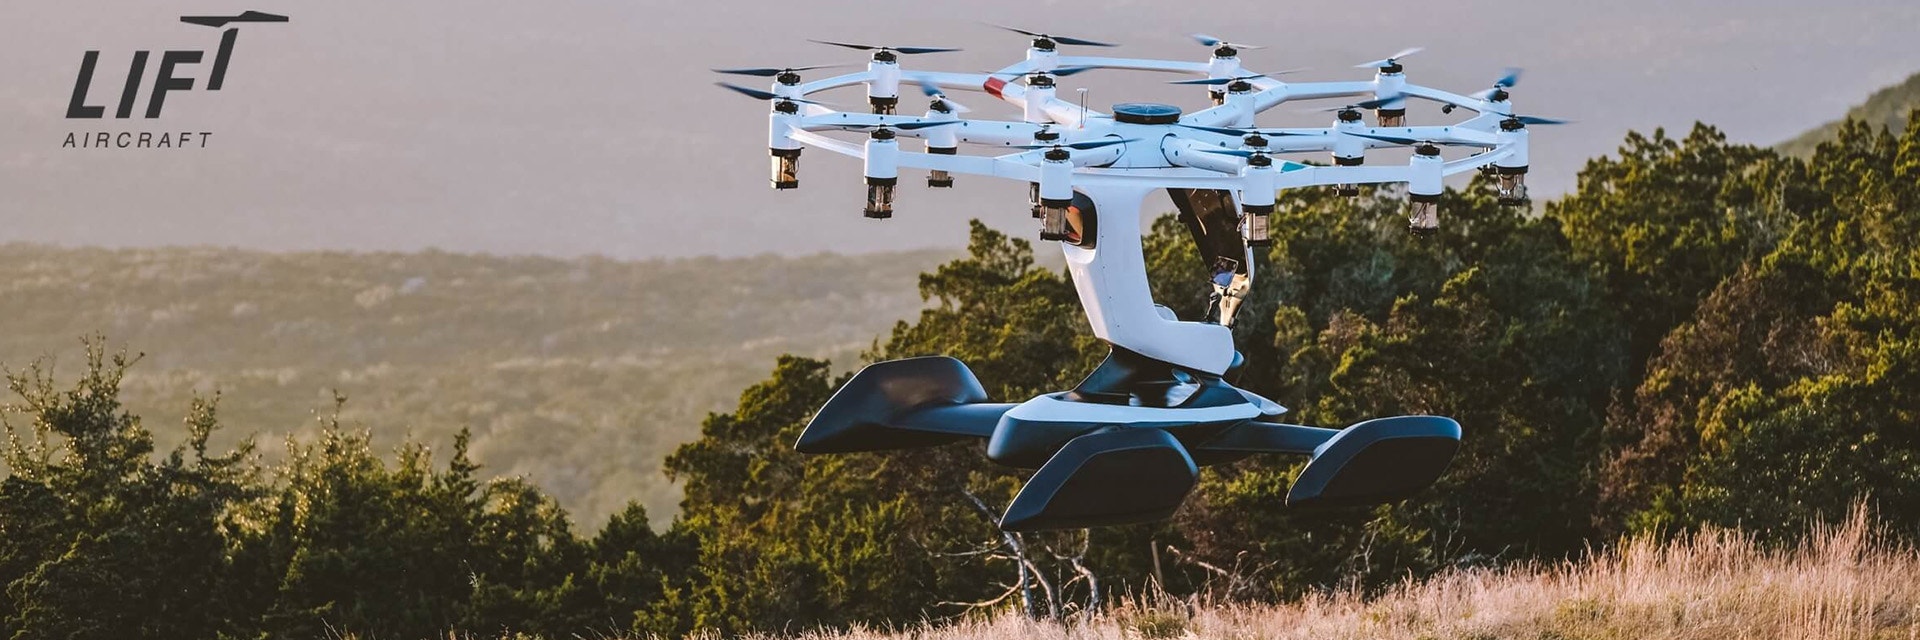 LIFT's HEXA aircraft flying unmanned above a field